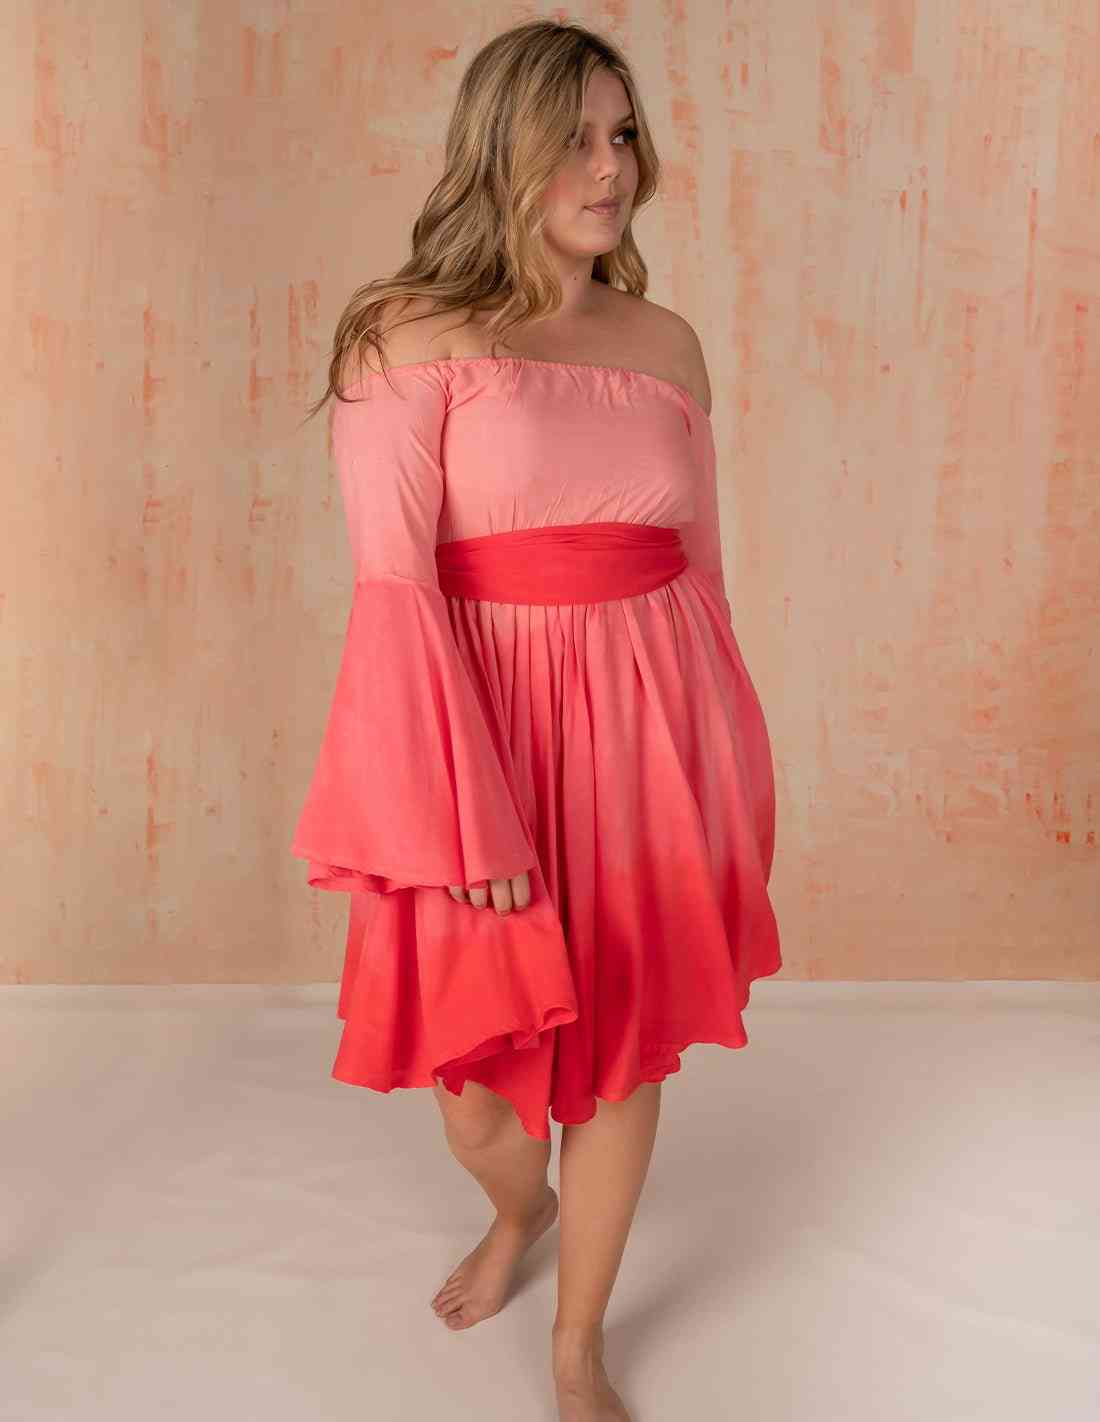 Vestido Butterfly Faded Red Flower. Vestido Teñido A Mano Color Faded Red Flower. Entreaguas